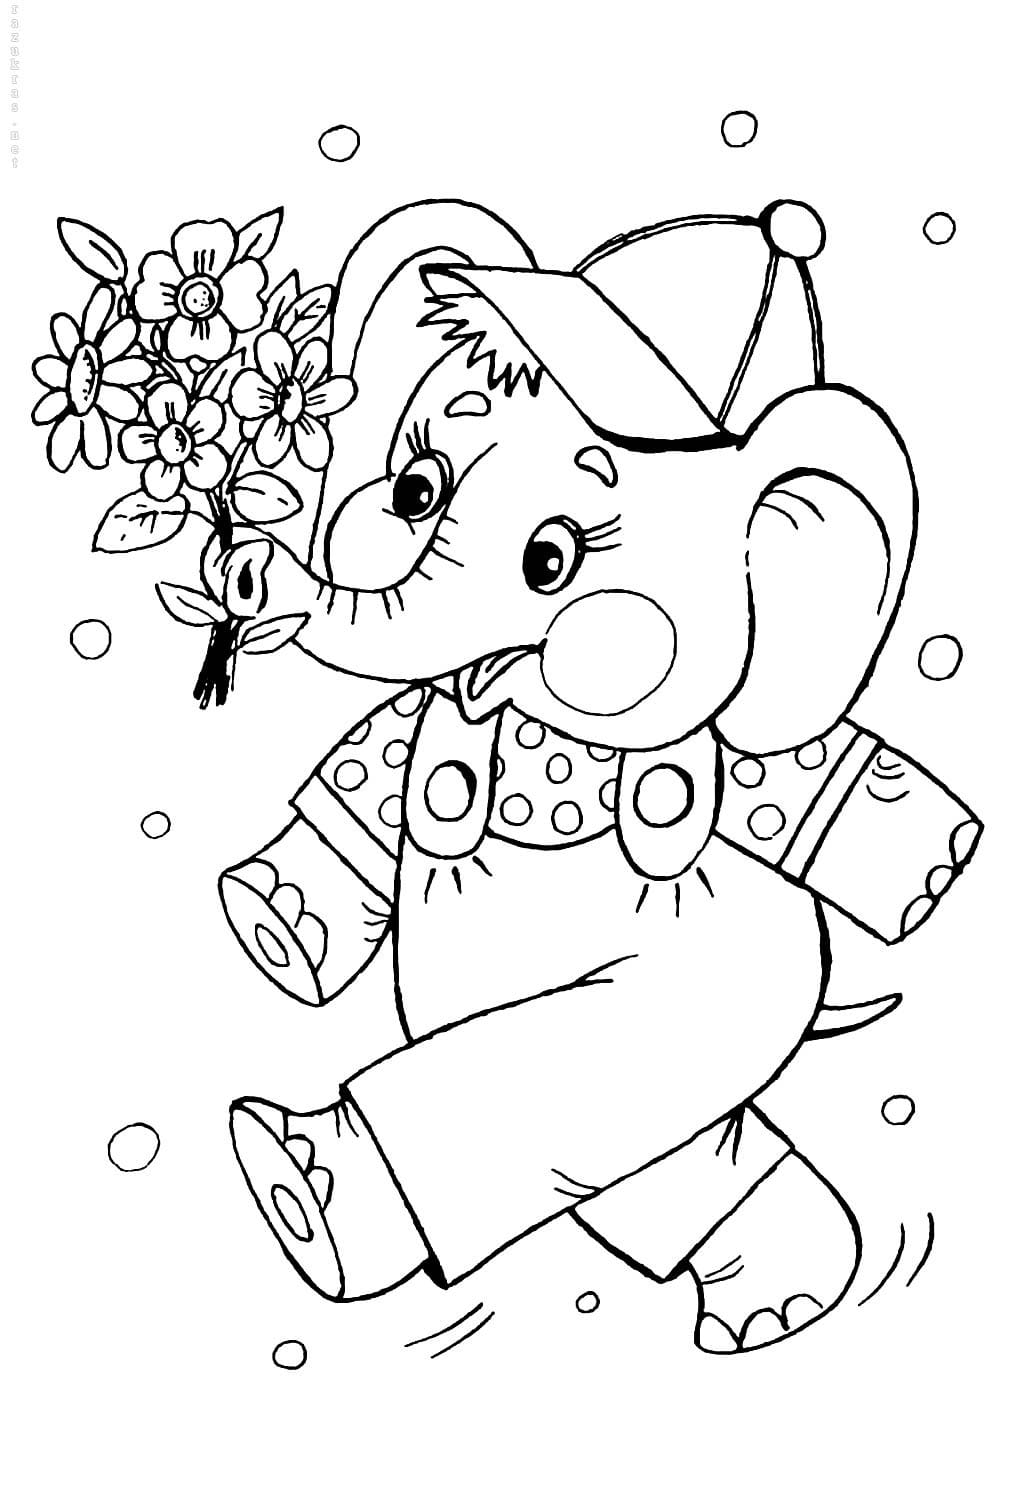 Coloring pages for kids 18 18 years. Download or print online